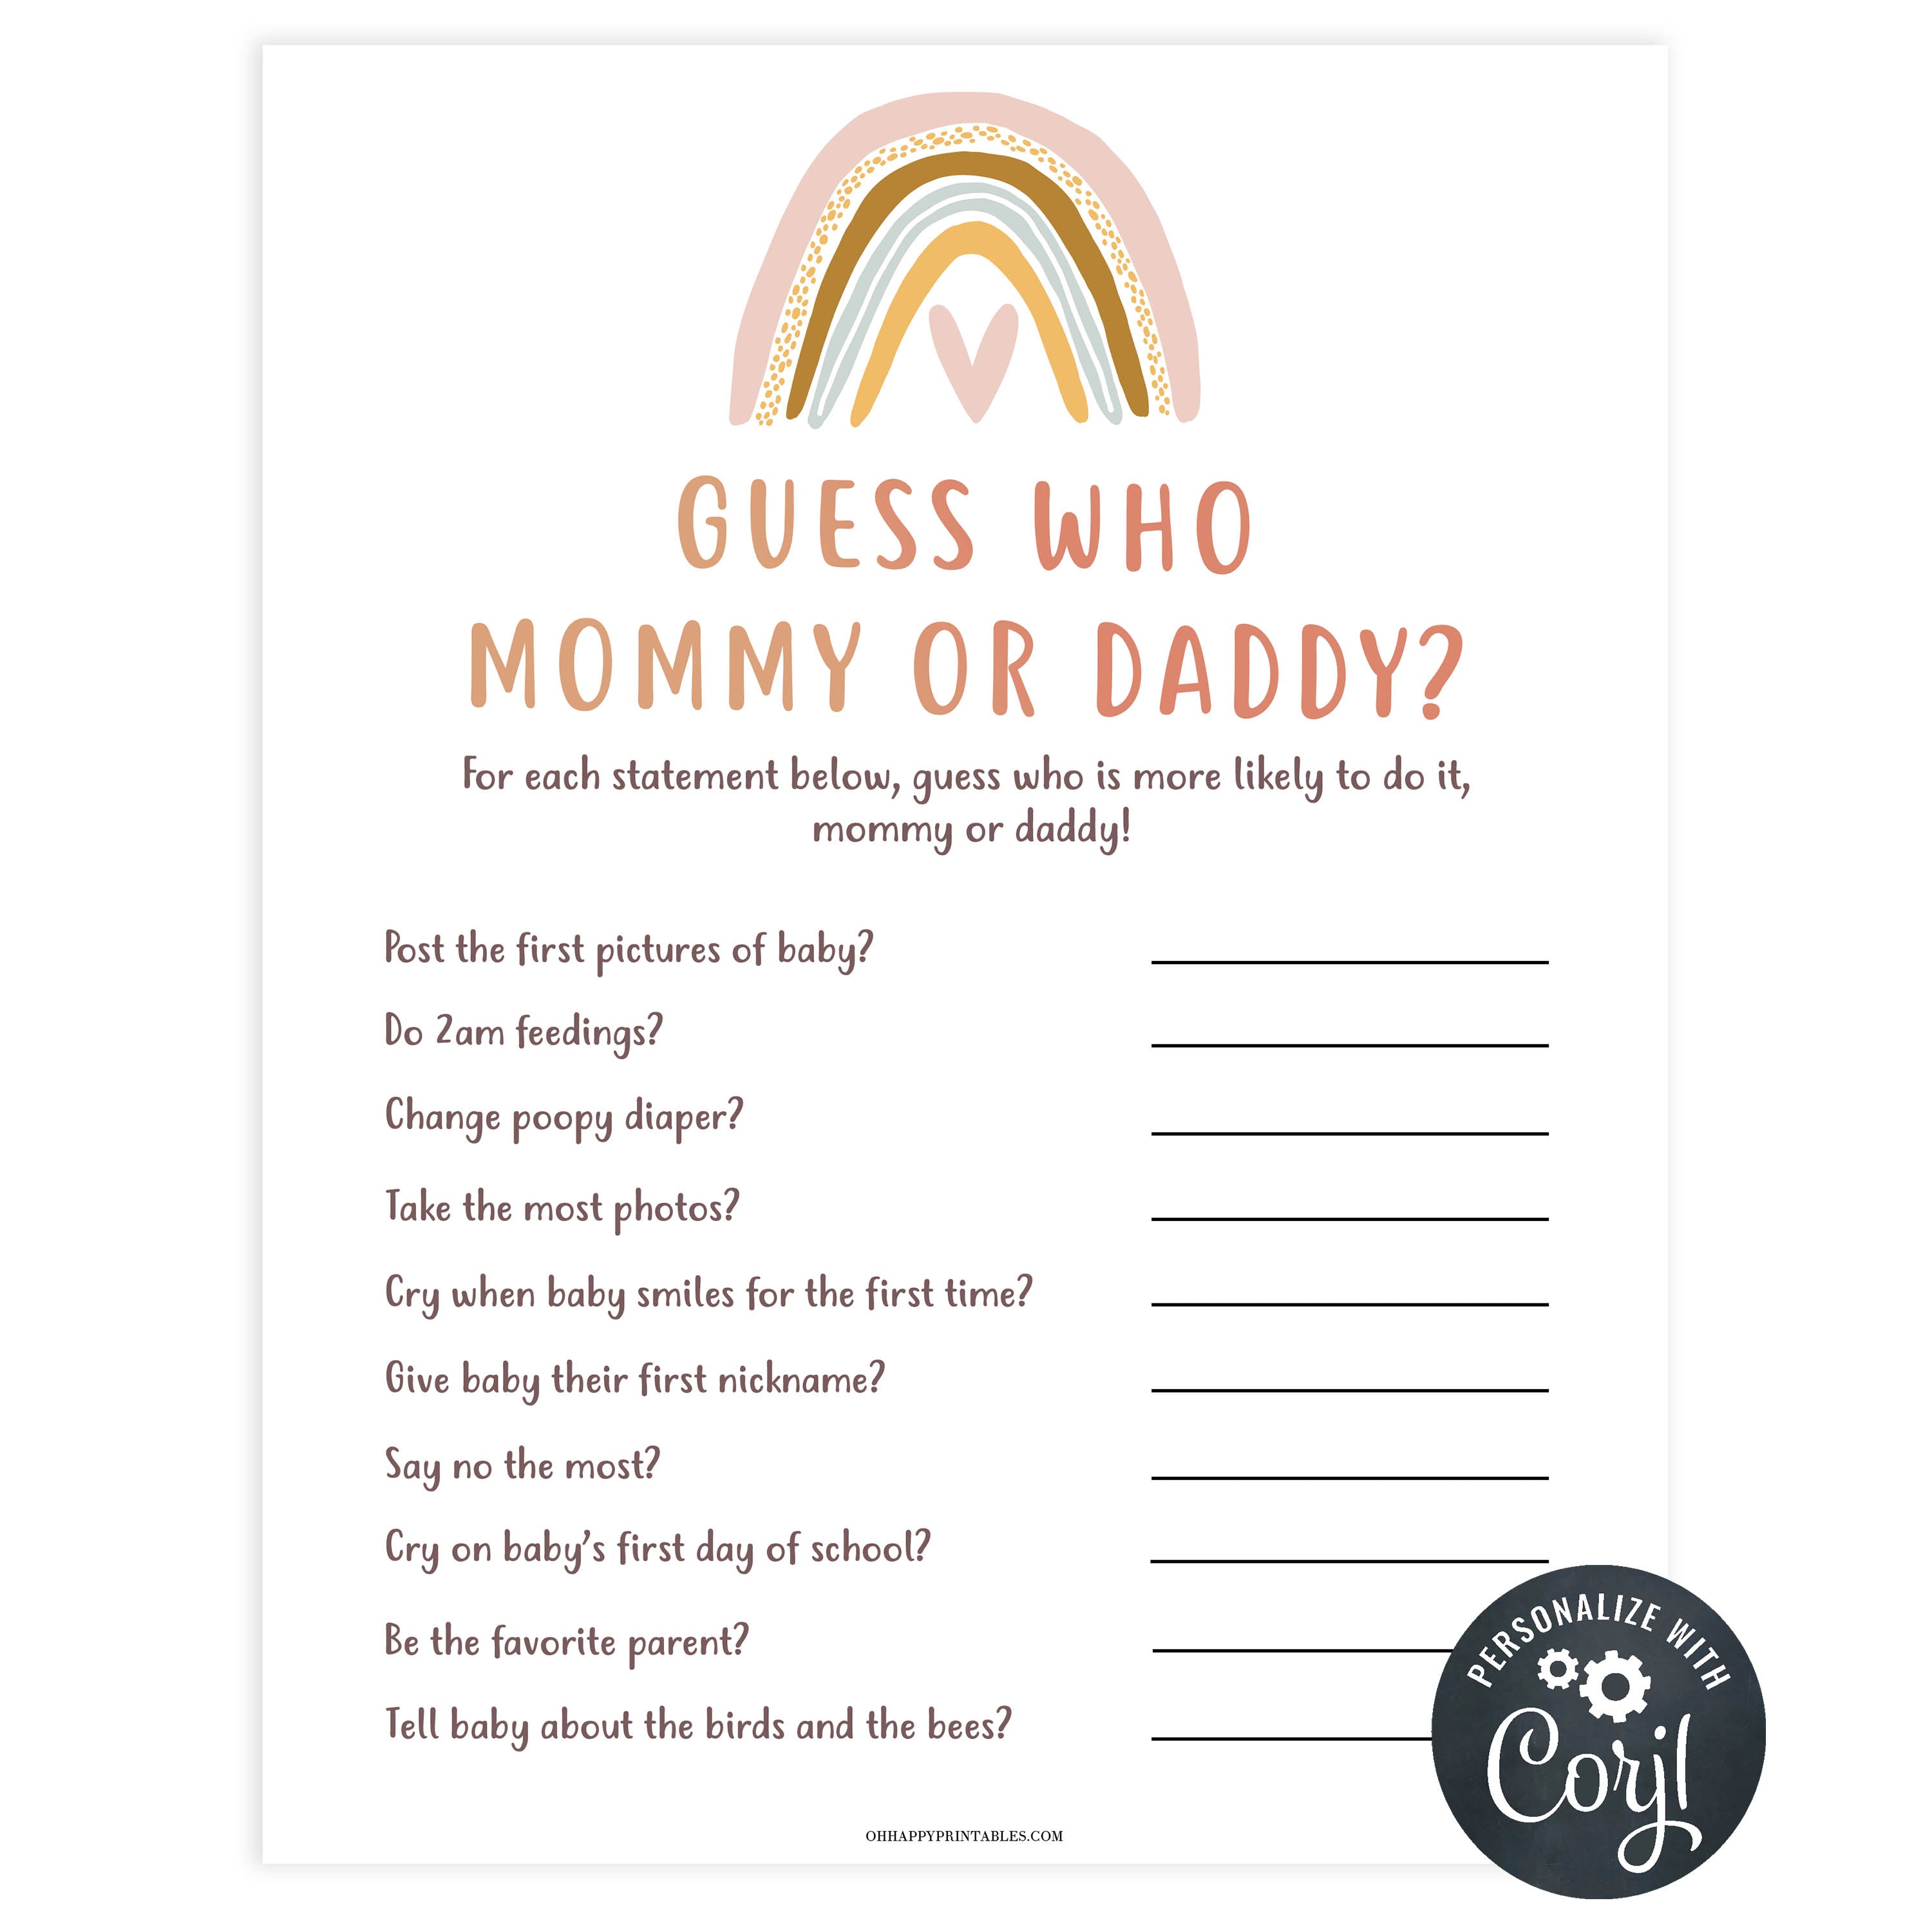 Guess who baby shower game, Printable baby shower games, boho rainbow baby games, baby shower games, fun baby shower ideas, top baby shower ideas, boho rainbow baby shower, baby shower games, fun boho rainbow baby shower ideas